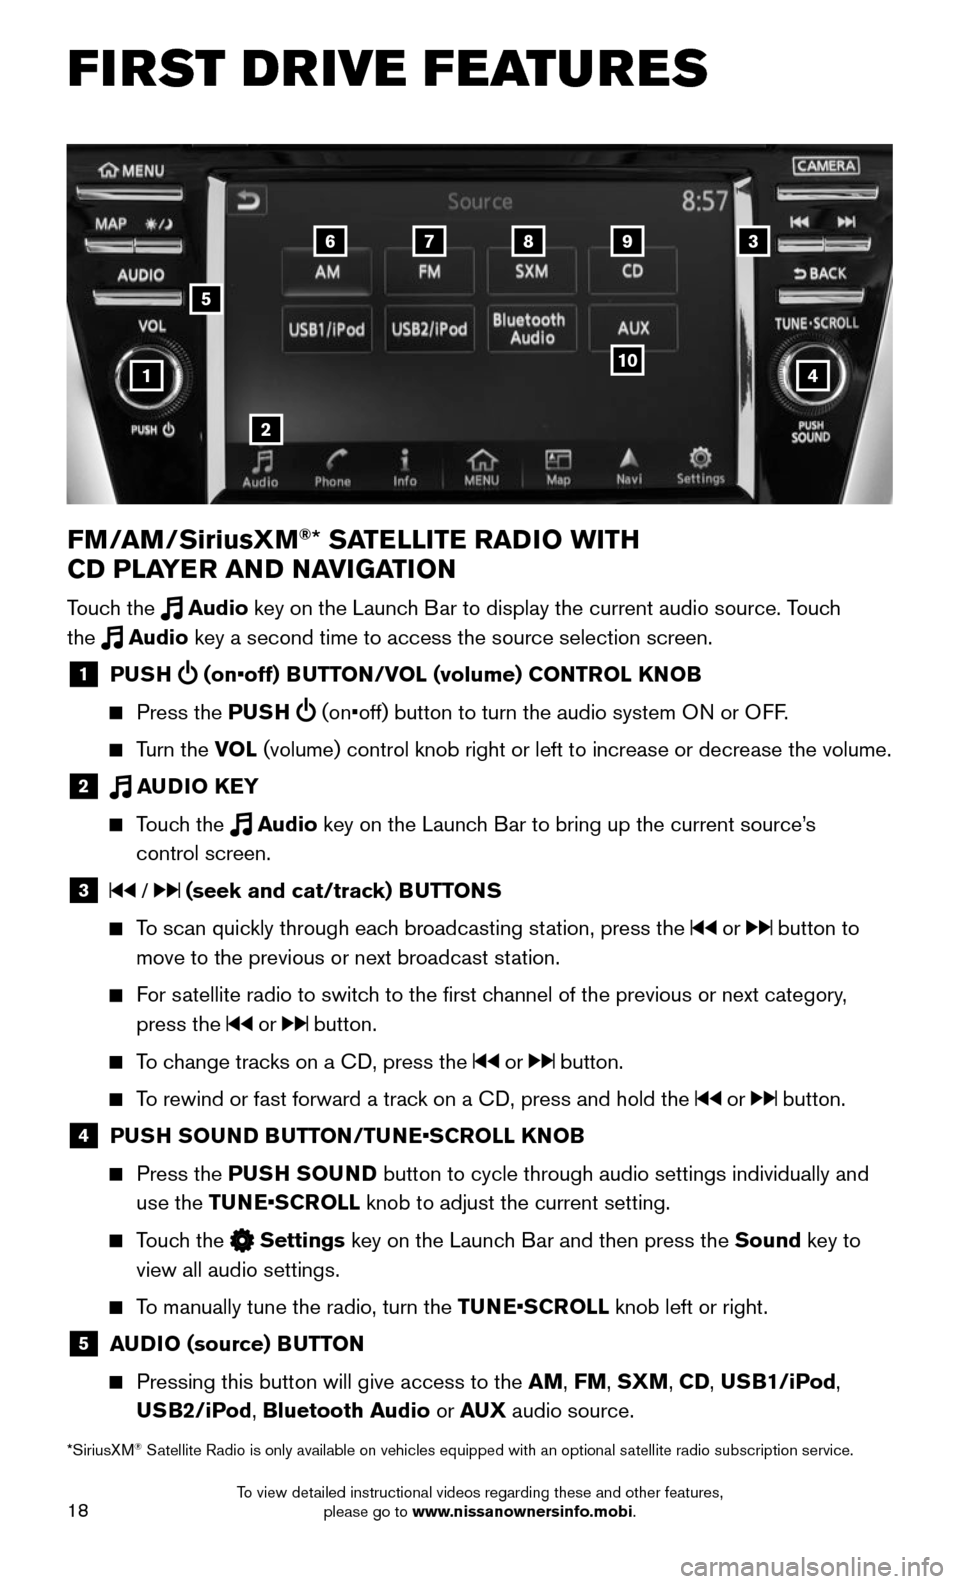 NISSAN MURANO 2015 3.G Quick Reference Guide 18
FIRST DRIVE FEATURES
4
6789
10
2
3
1
FM/AM/SiriusXM®* SATELLITE RADIO WITH  
CD PLAYER AND NAVIGATION
Touch the  Audio key on the Launch Bar to display the current audio source. Touch  
the  Audio